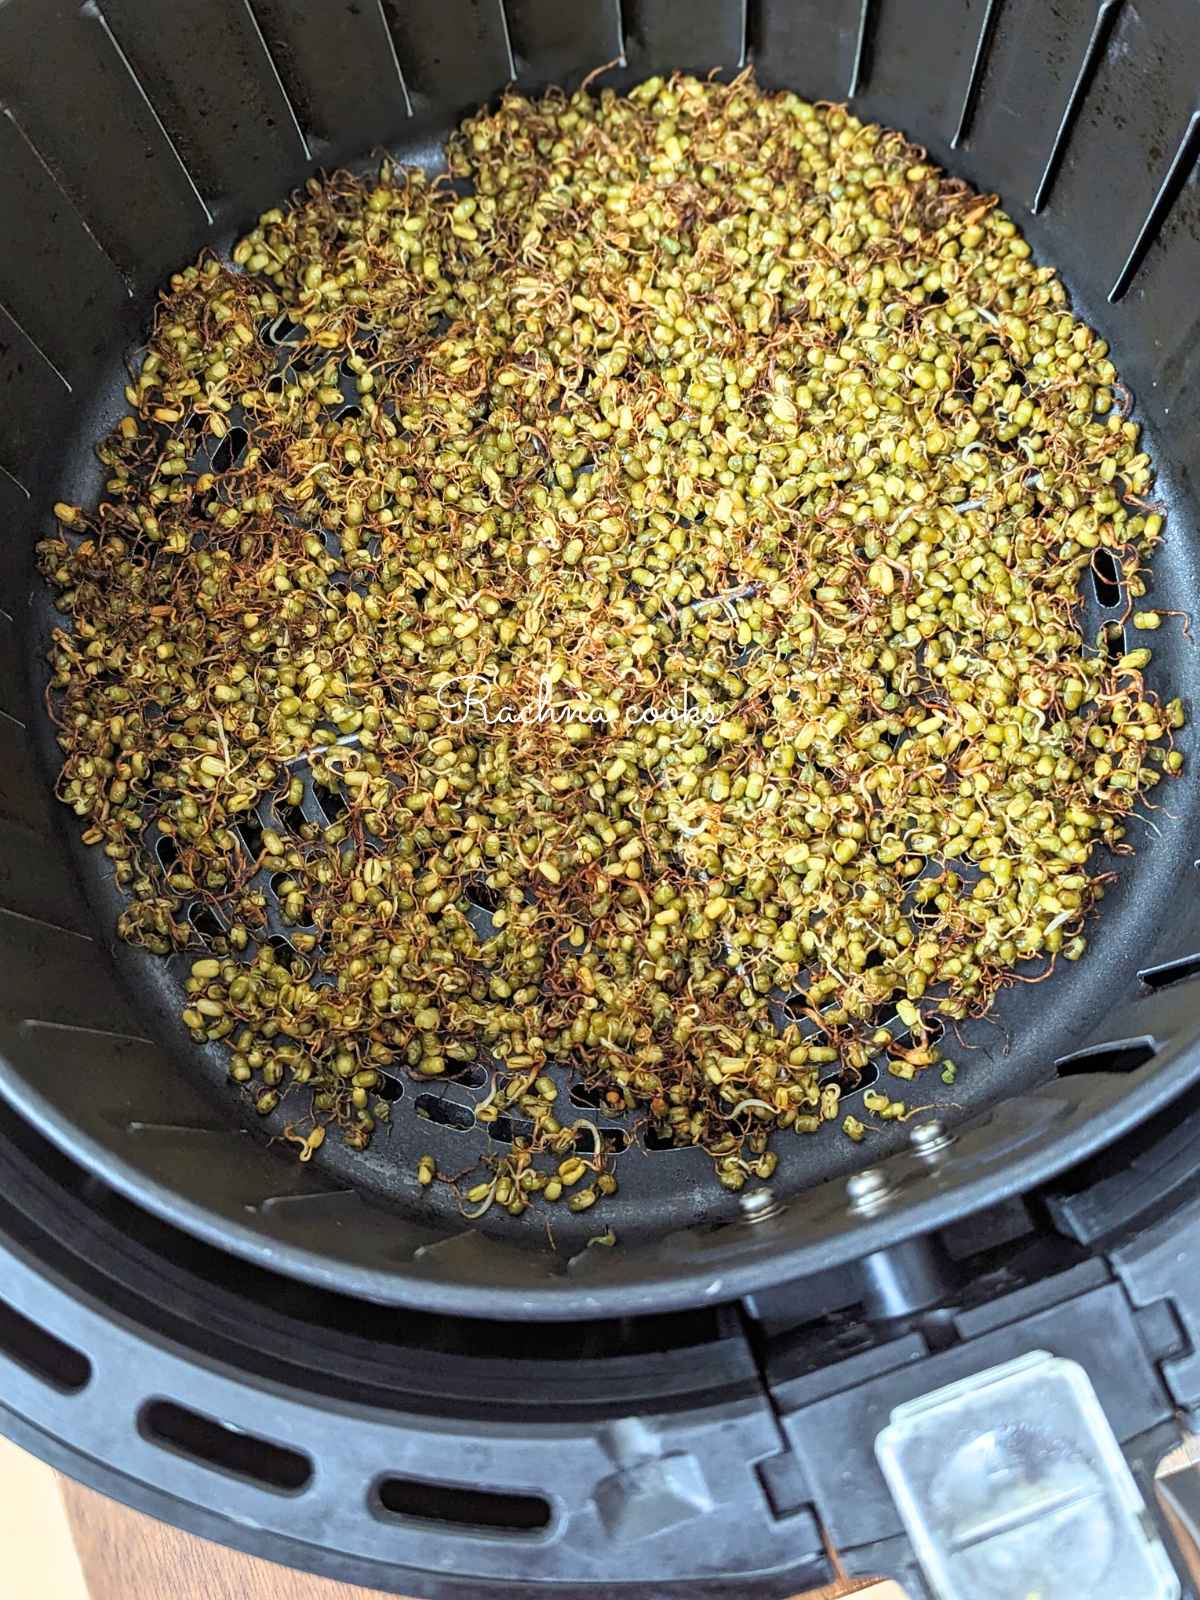 Air fried roasted moong sprouts in air fryer basket